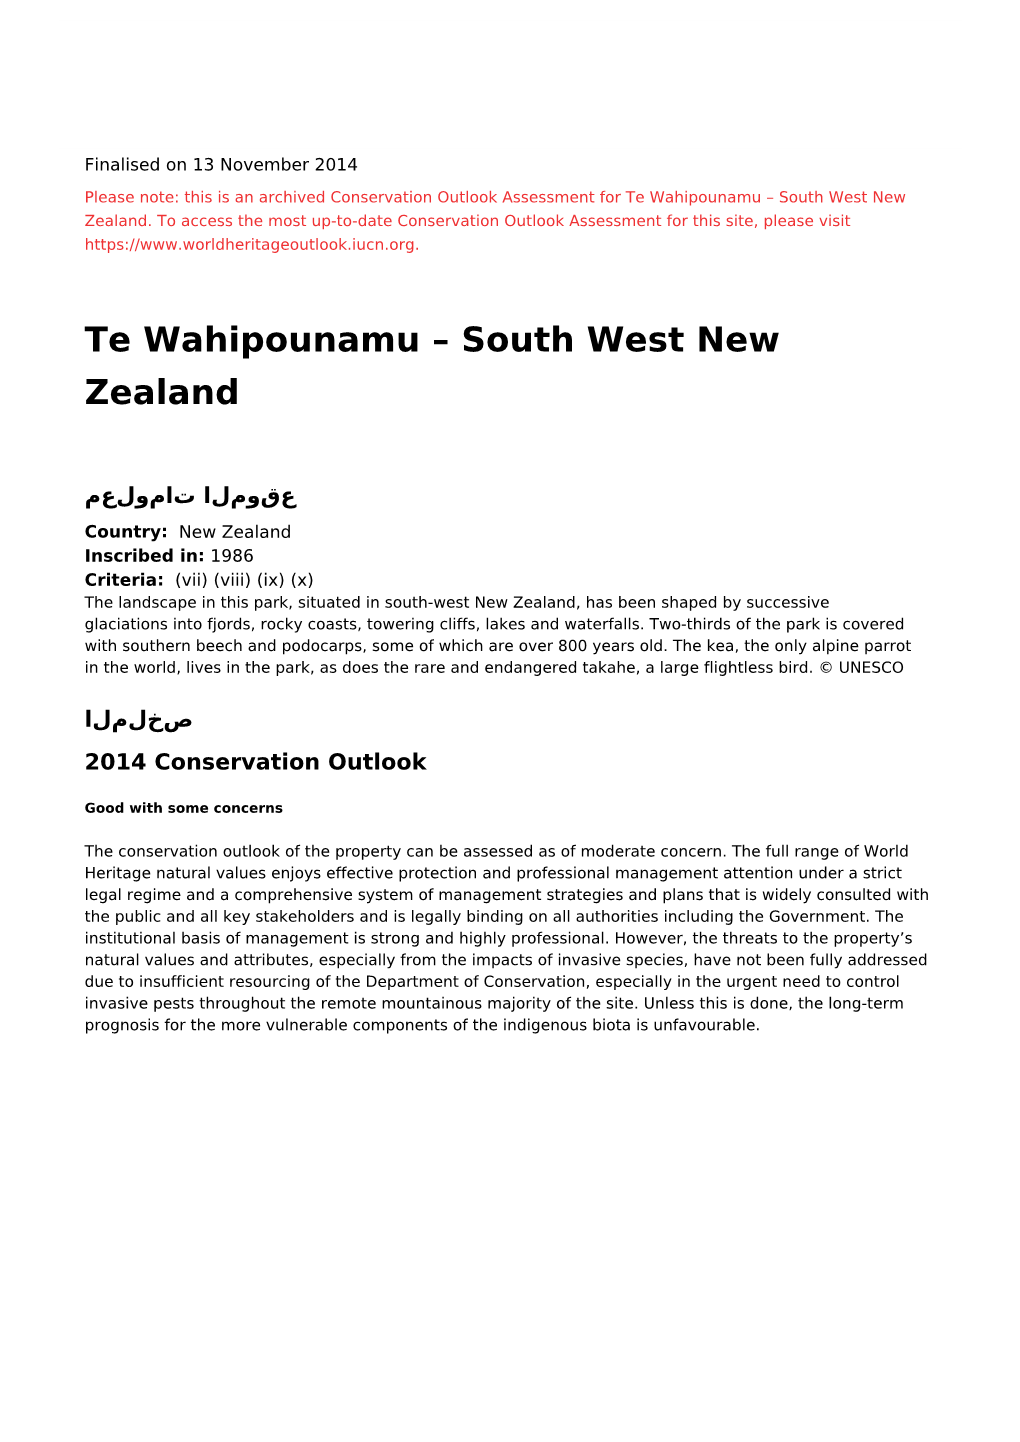 Te Wahipounamu – South West New Zealand - 2014 Conservation Outlook Assessment (Archived)